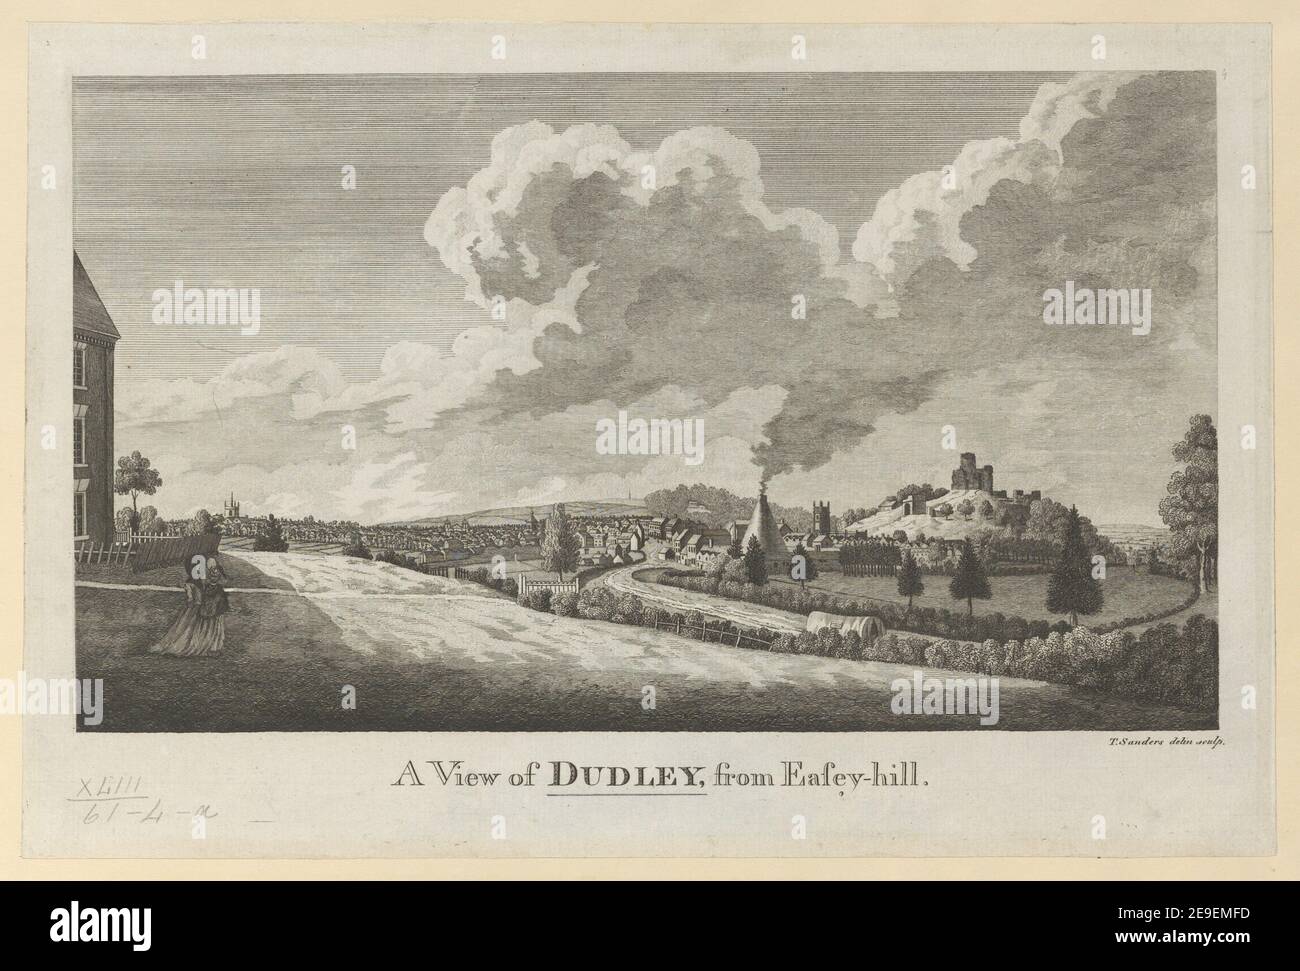 A View of DUDLEY, from Easey hill.  Author  Sanders, Thomas 43.61.4.a. Place of publication: [Worcester] Publisher: [unknown publisher]., Date of publication: [1779 c.]  Item type: 1 print Medium: etching Dimensions: sheet 21.7 x 32.6 cm [trimmed within platemark].  Former owner: George III, King of Great Britain, 1738-1820 Stock Photo